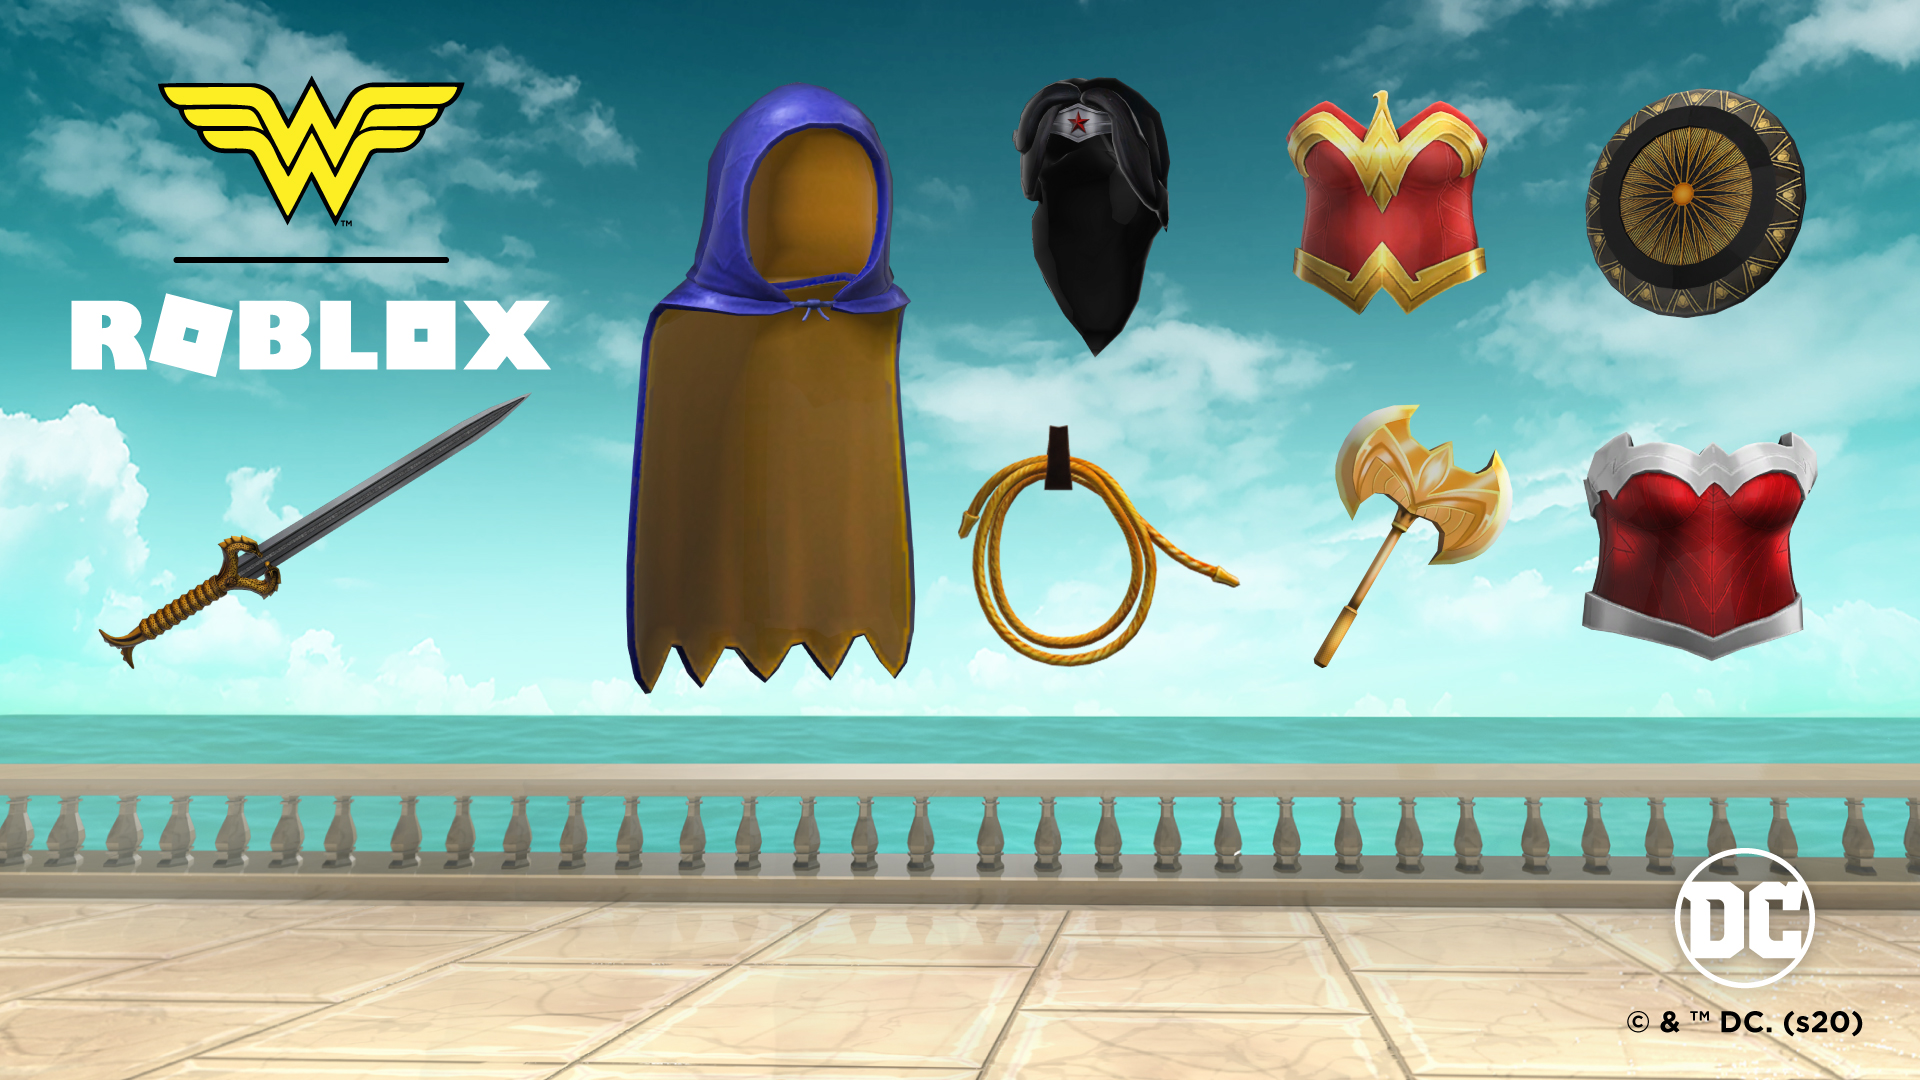 Rbxnews On Twitter Here Are All The Prizes You Can Currently Earn From The Roblox Wonder Woman Game Event Page Https T Co Javmrppsox Blog Post Https T Co Kszycbsyhm Make Sure To Be On The Lookout - rcw on twitter 500 robux to win make sure to attend